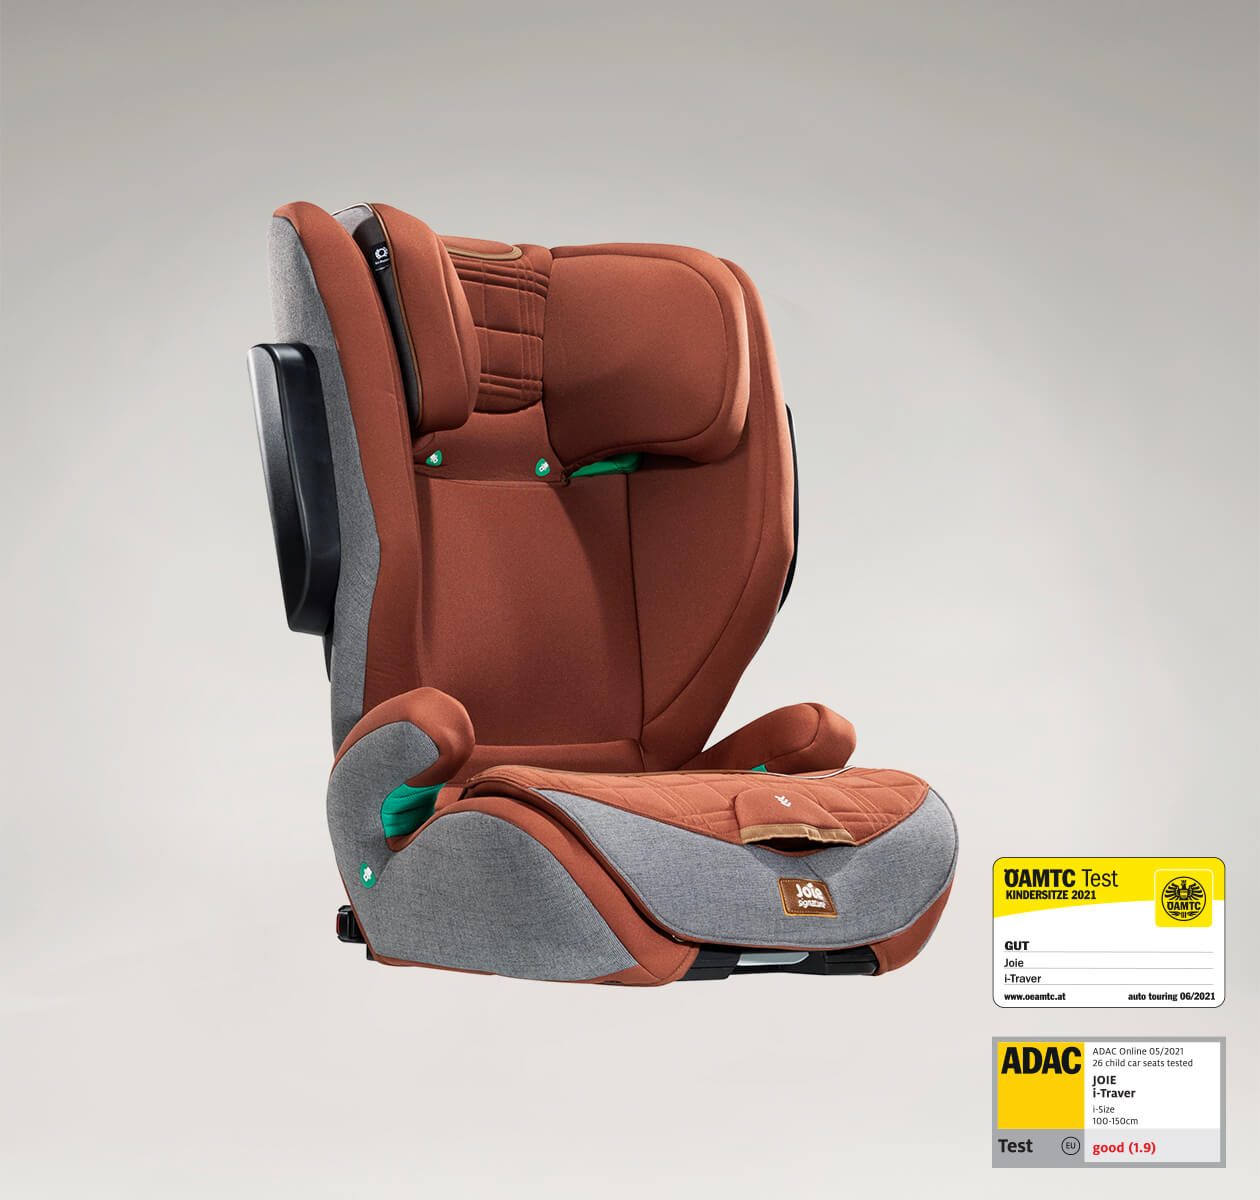 https://dd.joiebaby.com/media/catalog/product/p/1/p1-joie-signature-belted-booster-car-seat-itraver-cider-right-angle-adac-oamtc_1.jpg?type=product&height=265&width=265